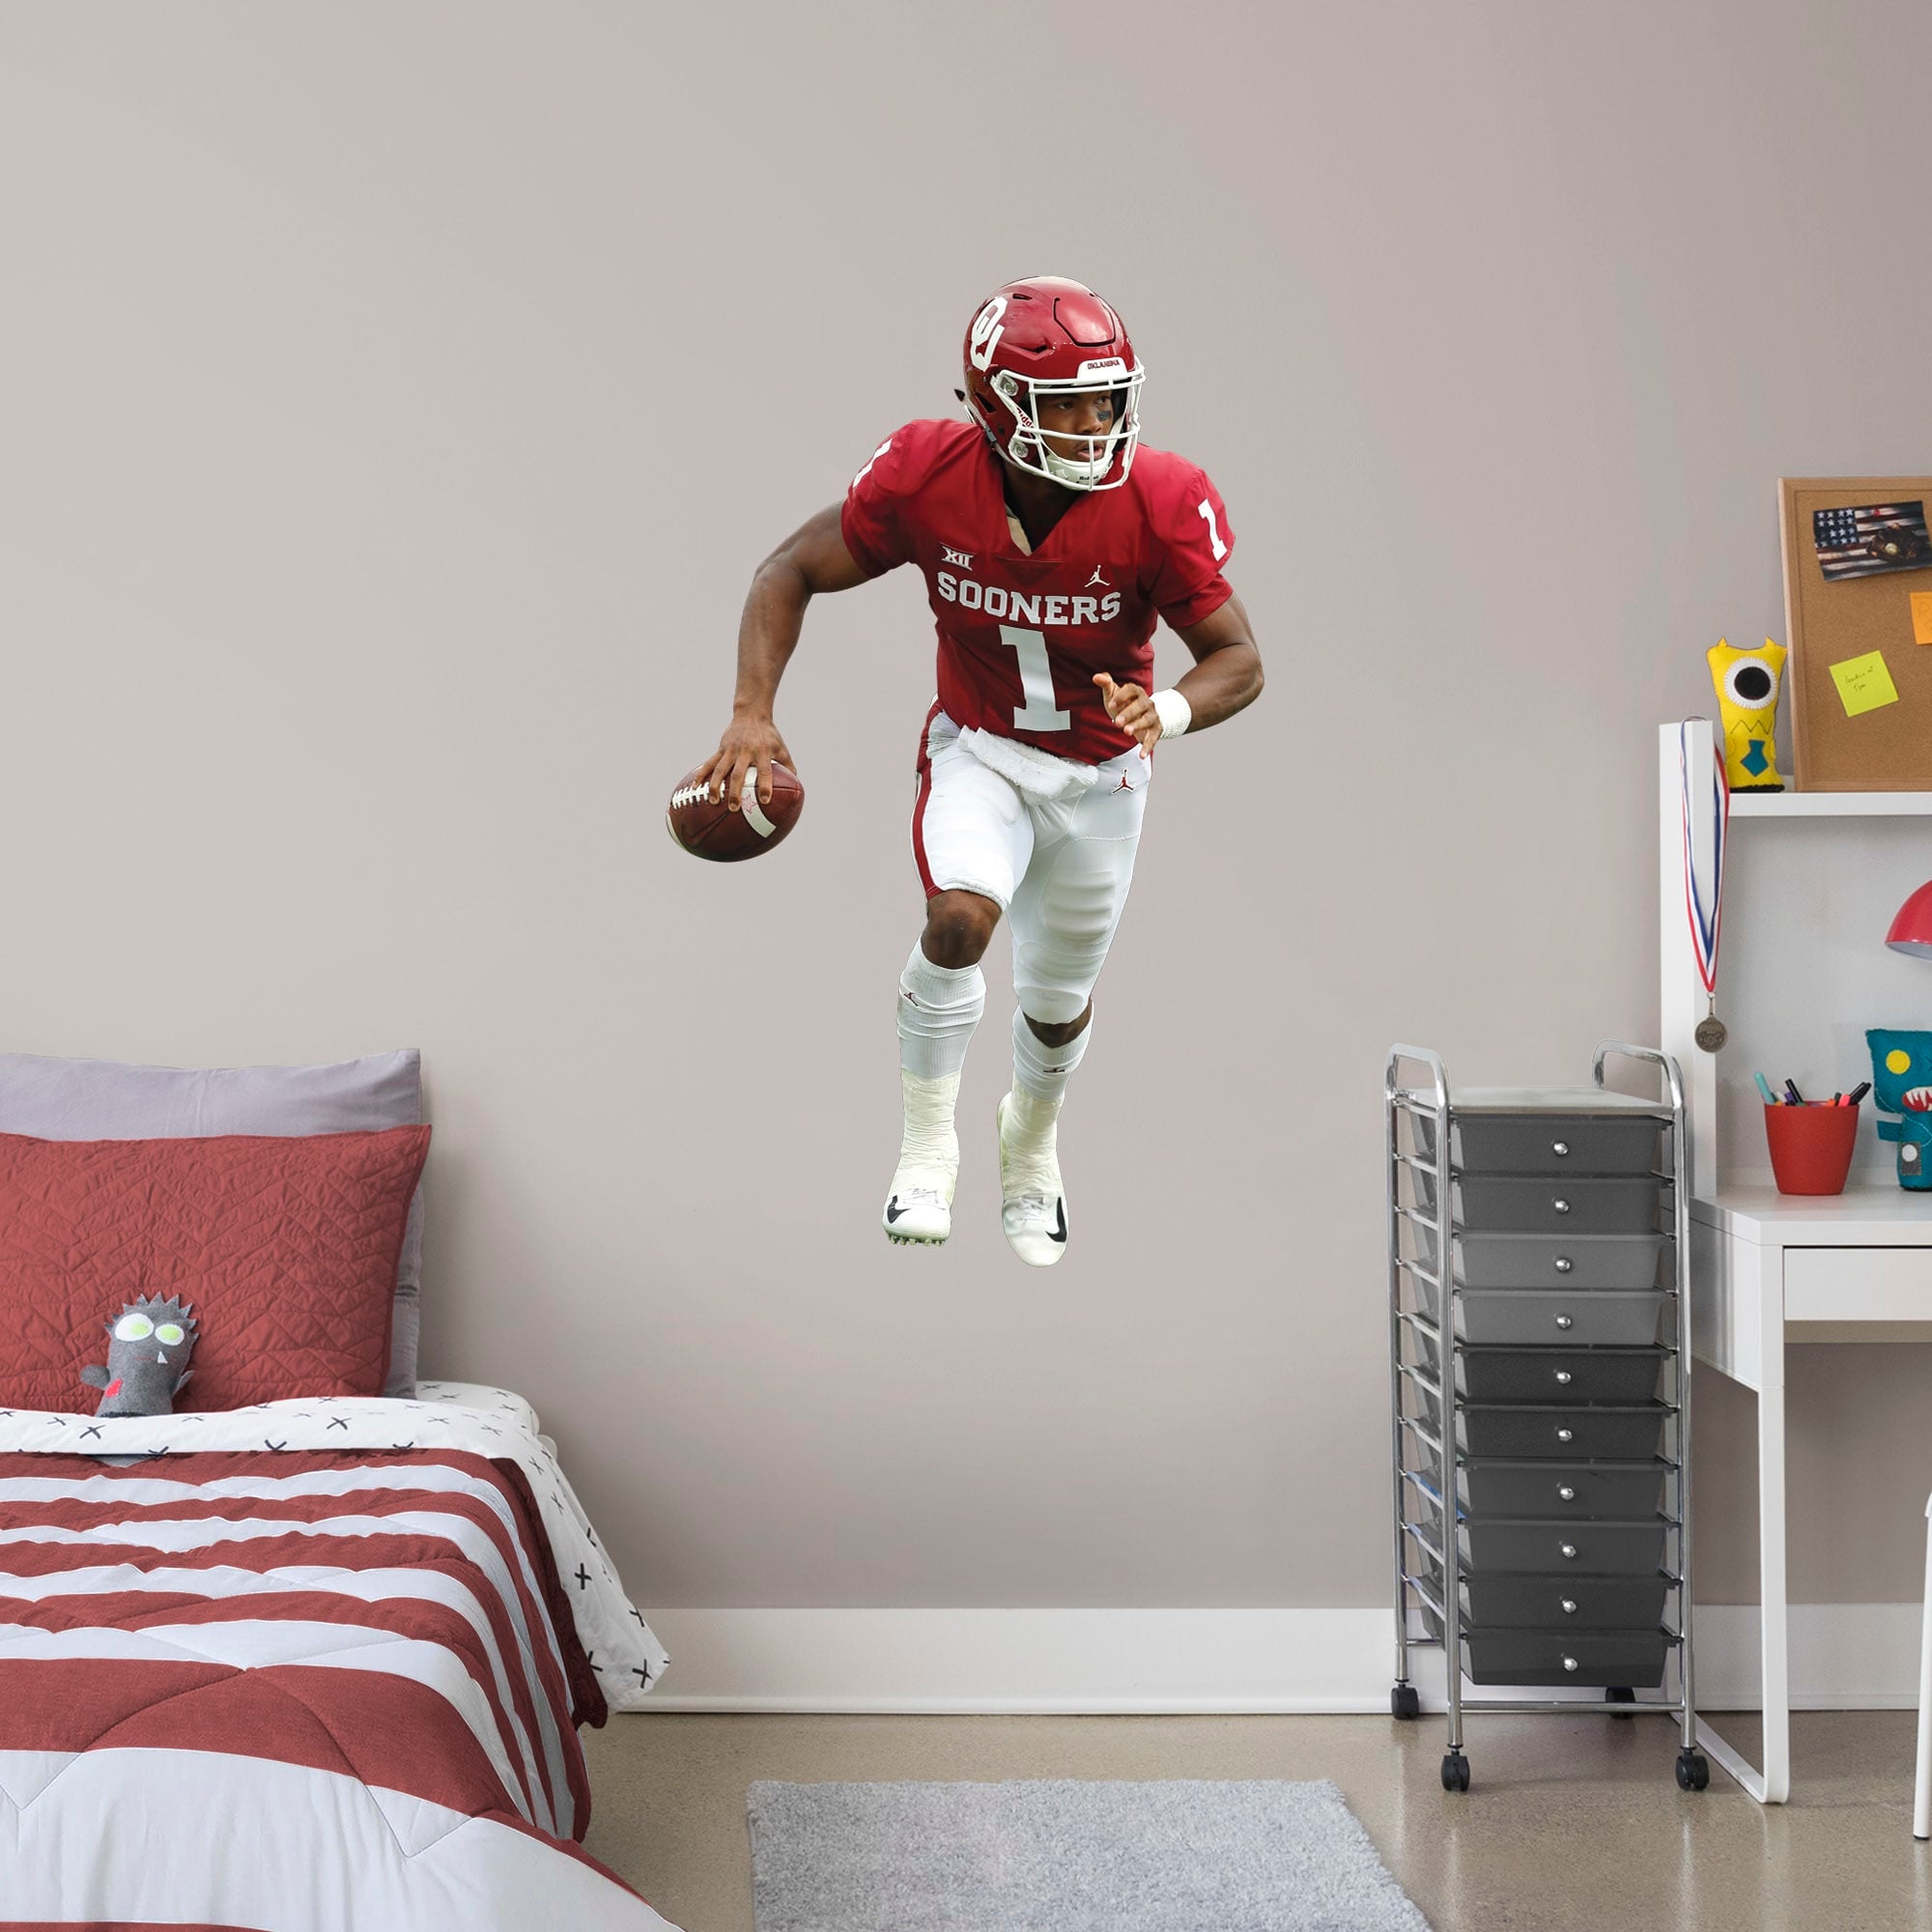 Kyler Murray for Oklahoma Sooners: Oklahoma - Officially Licensed Removable Wall Decal Giant Athlete + 2 Decals (31"W x 51"H) by